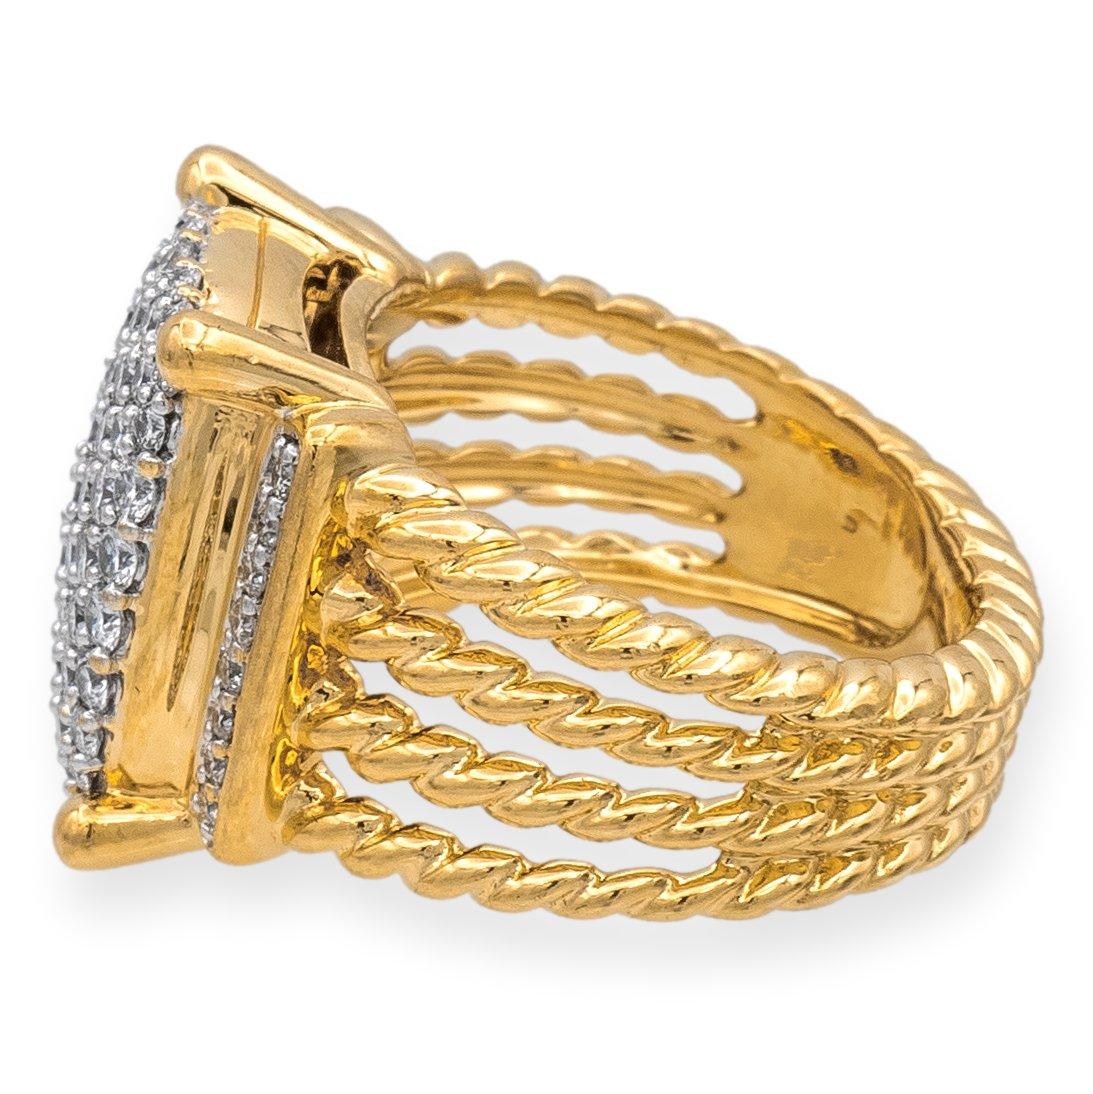 David Yurman 18k Yellow Gold Diamond Pave 1.14 Carat Wheaton Cocktail Ring In Excellent Condition For Sale In New York, NY